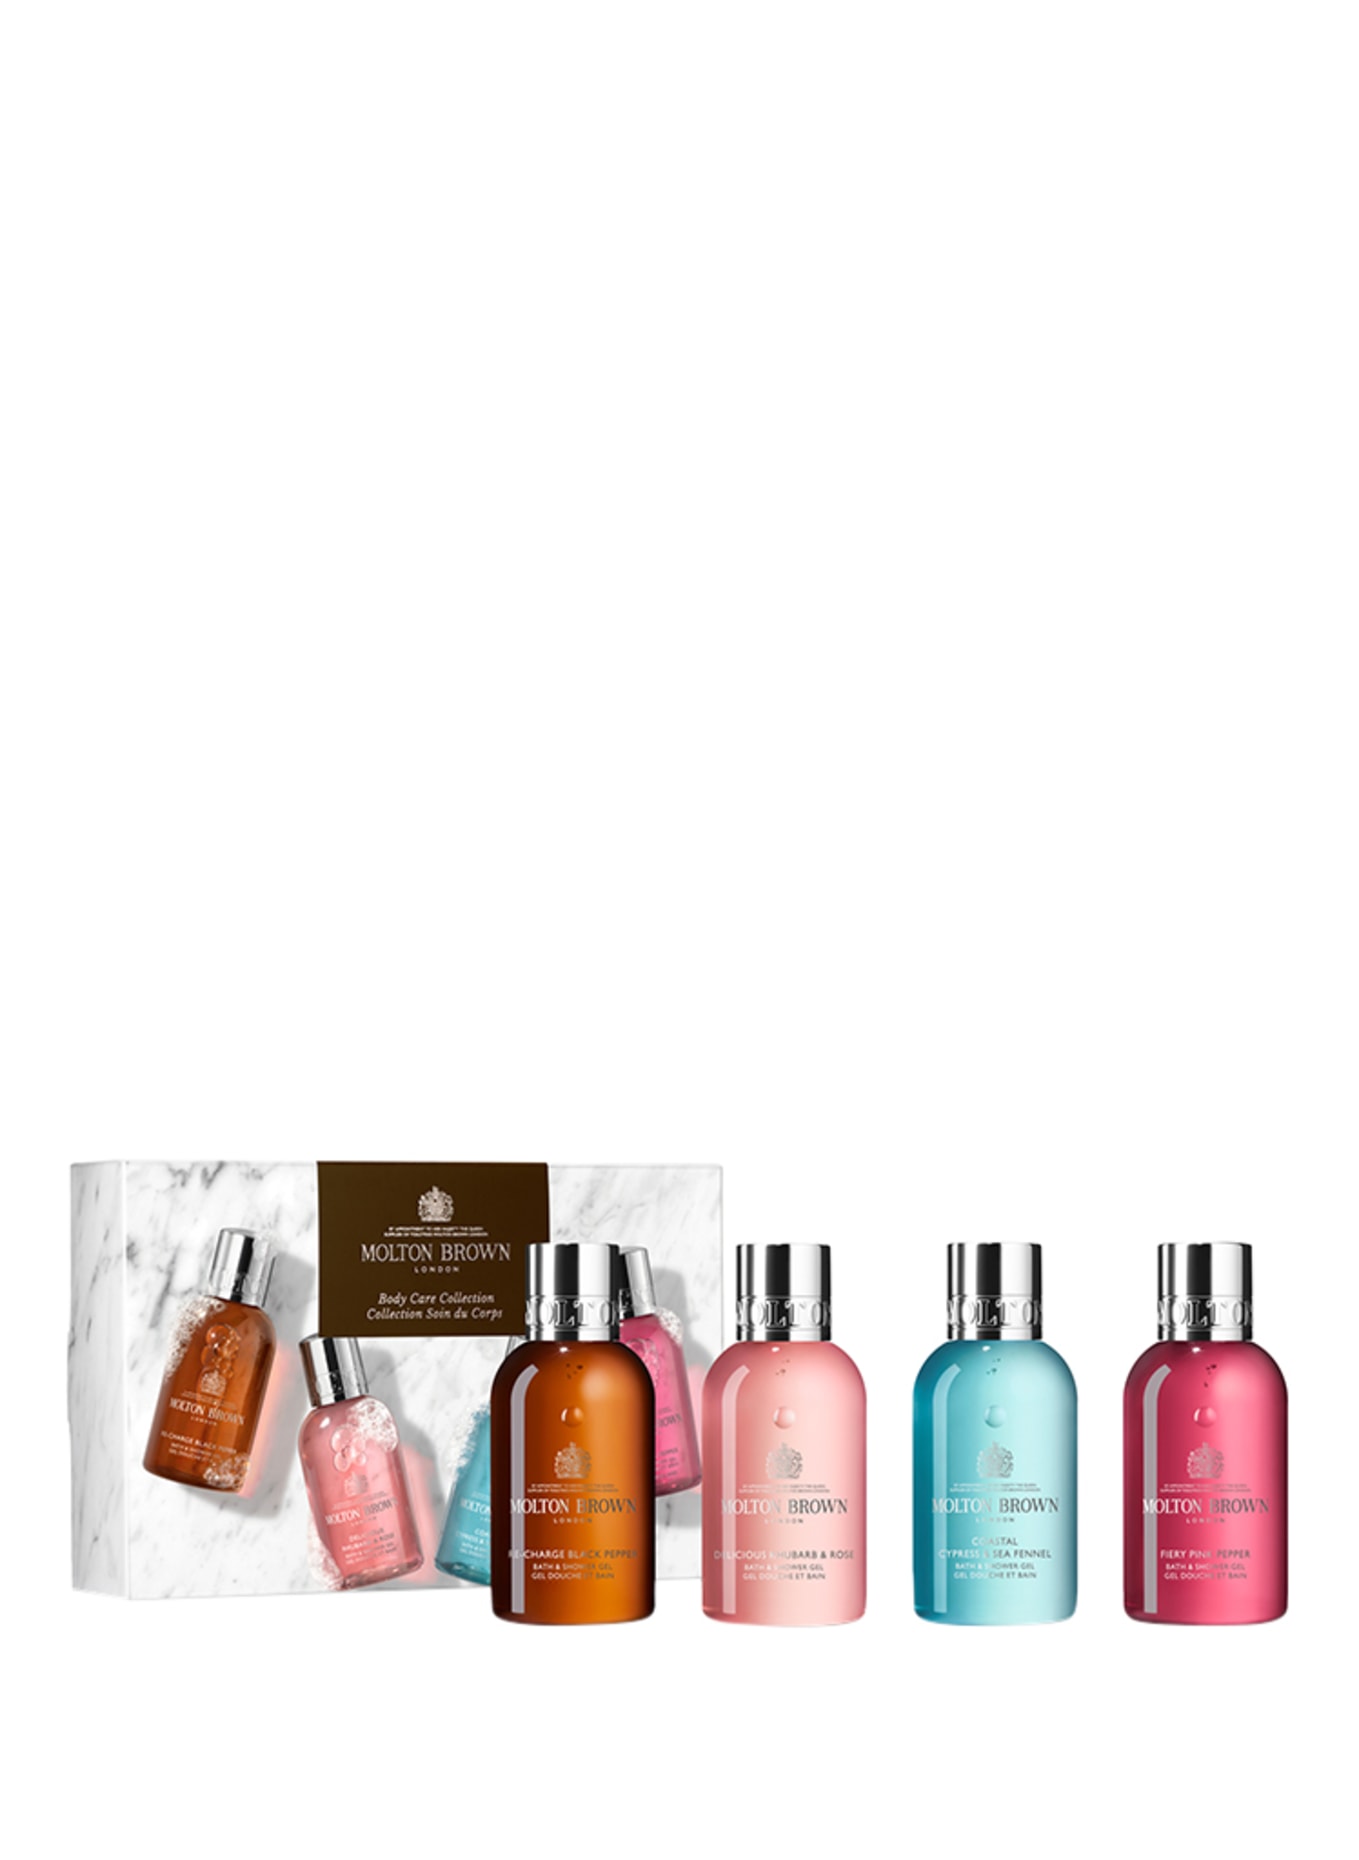 MOLTON BROWN WOODY & FLORAL BODY CARE COLLECTION (Obrázek 1)